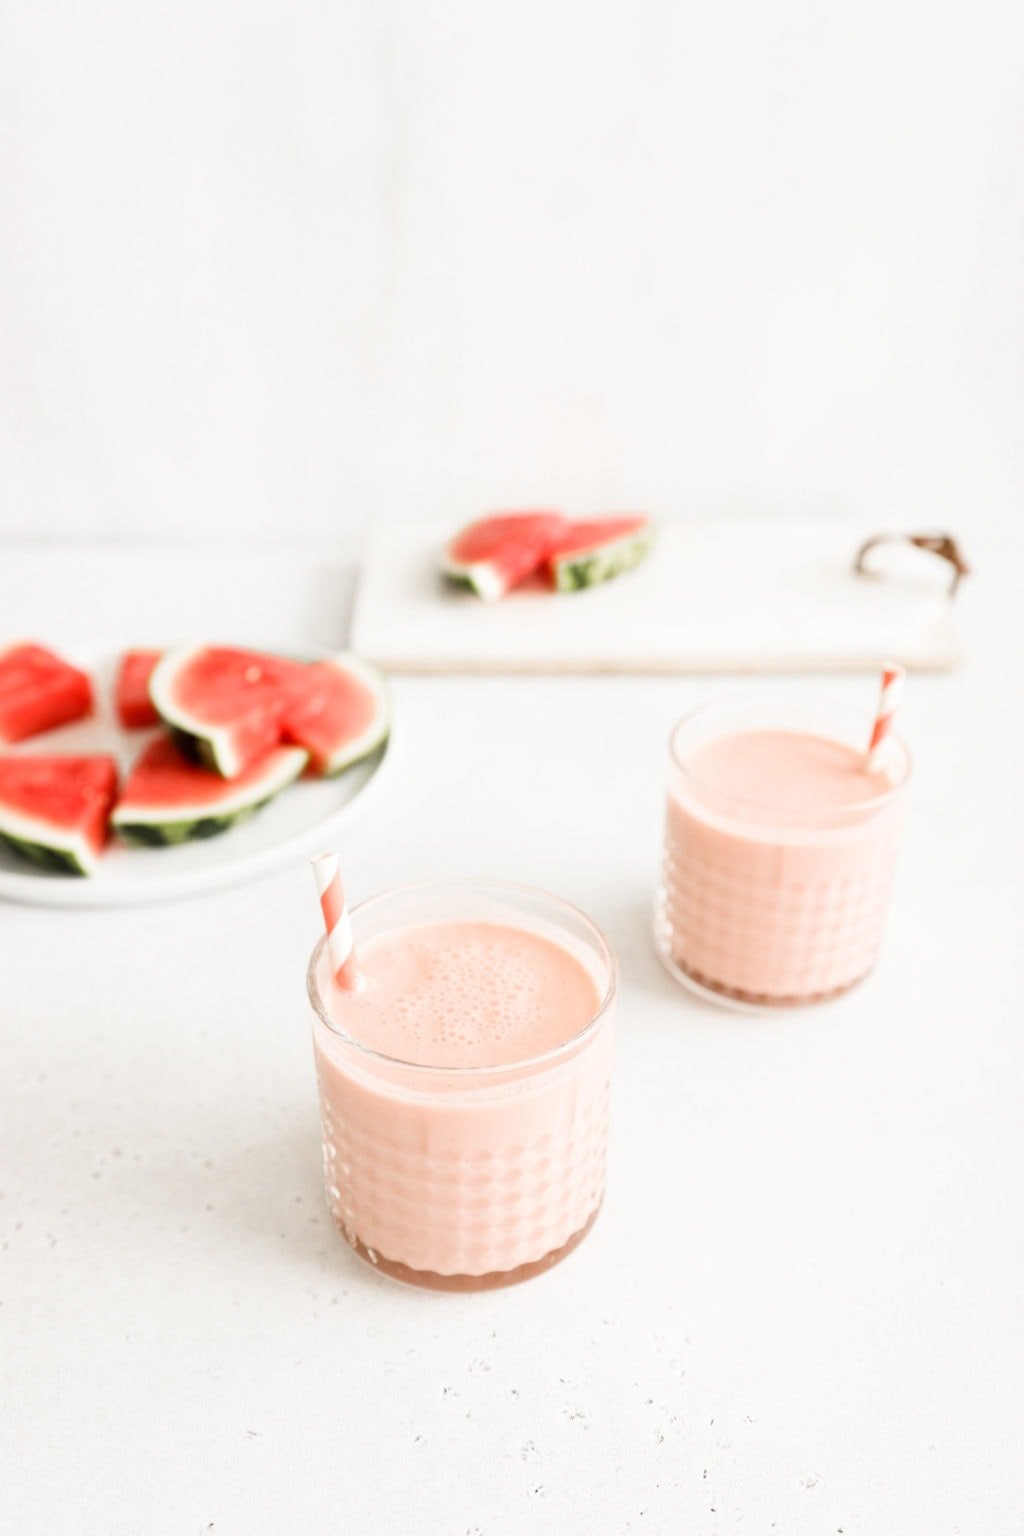 Two watermelon banana smoothies in a glass cup with a striped pink and white straw. The smoothies are on a neutral surface with slices of watermelon beside them. Ingredients include: watermelon, banana, Greek yogurt, lime.